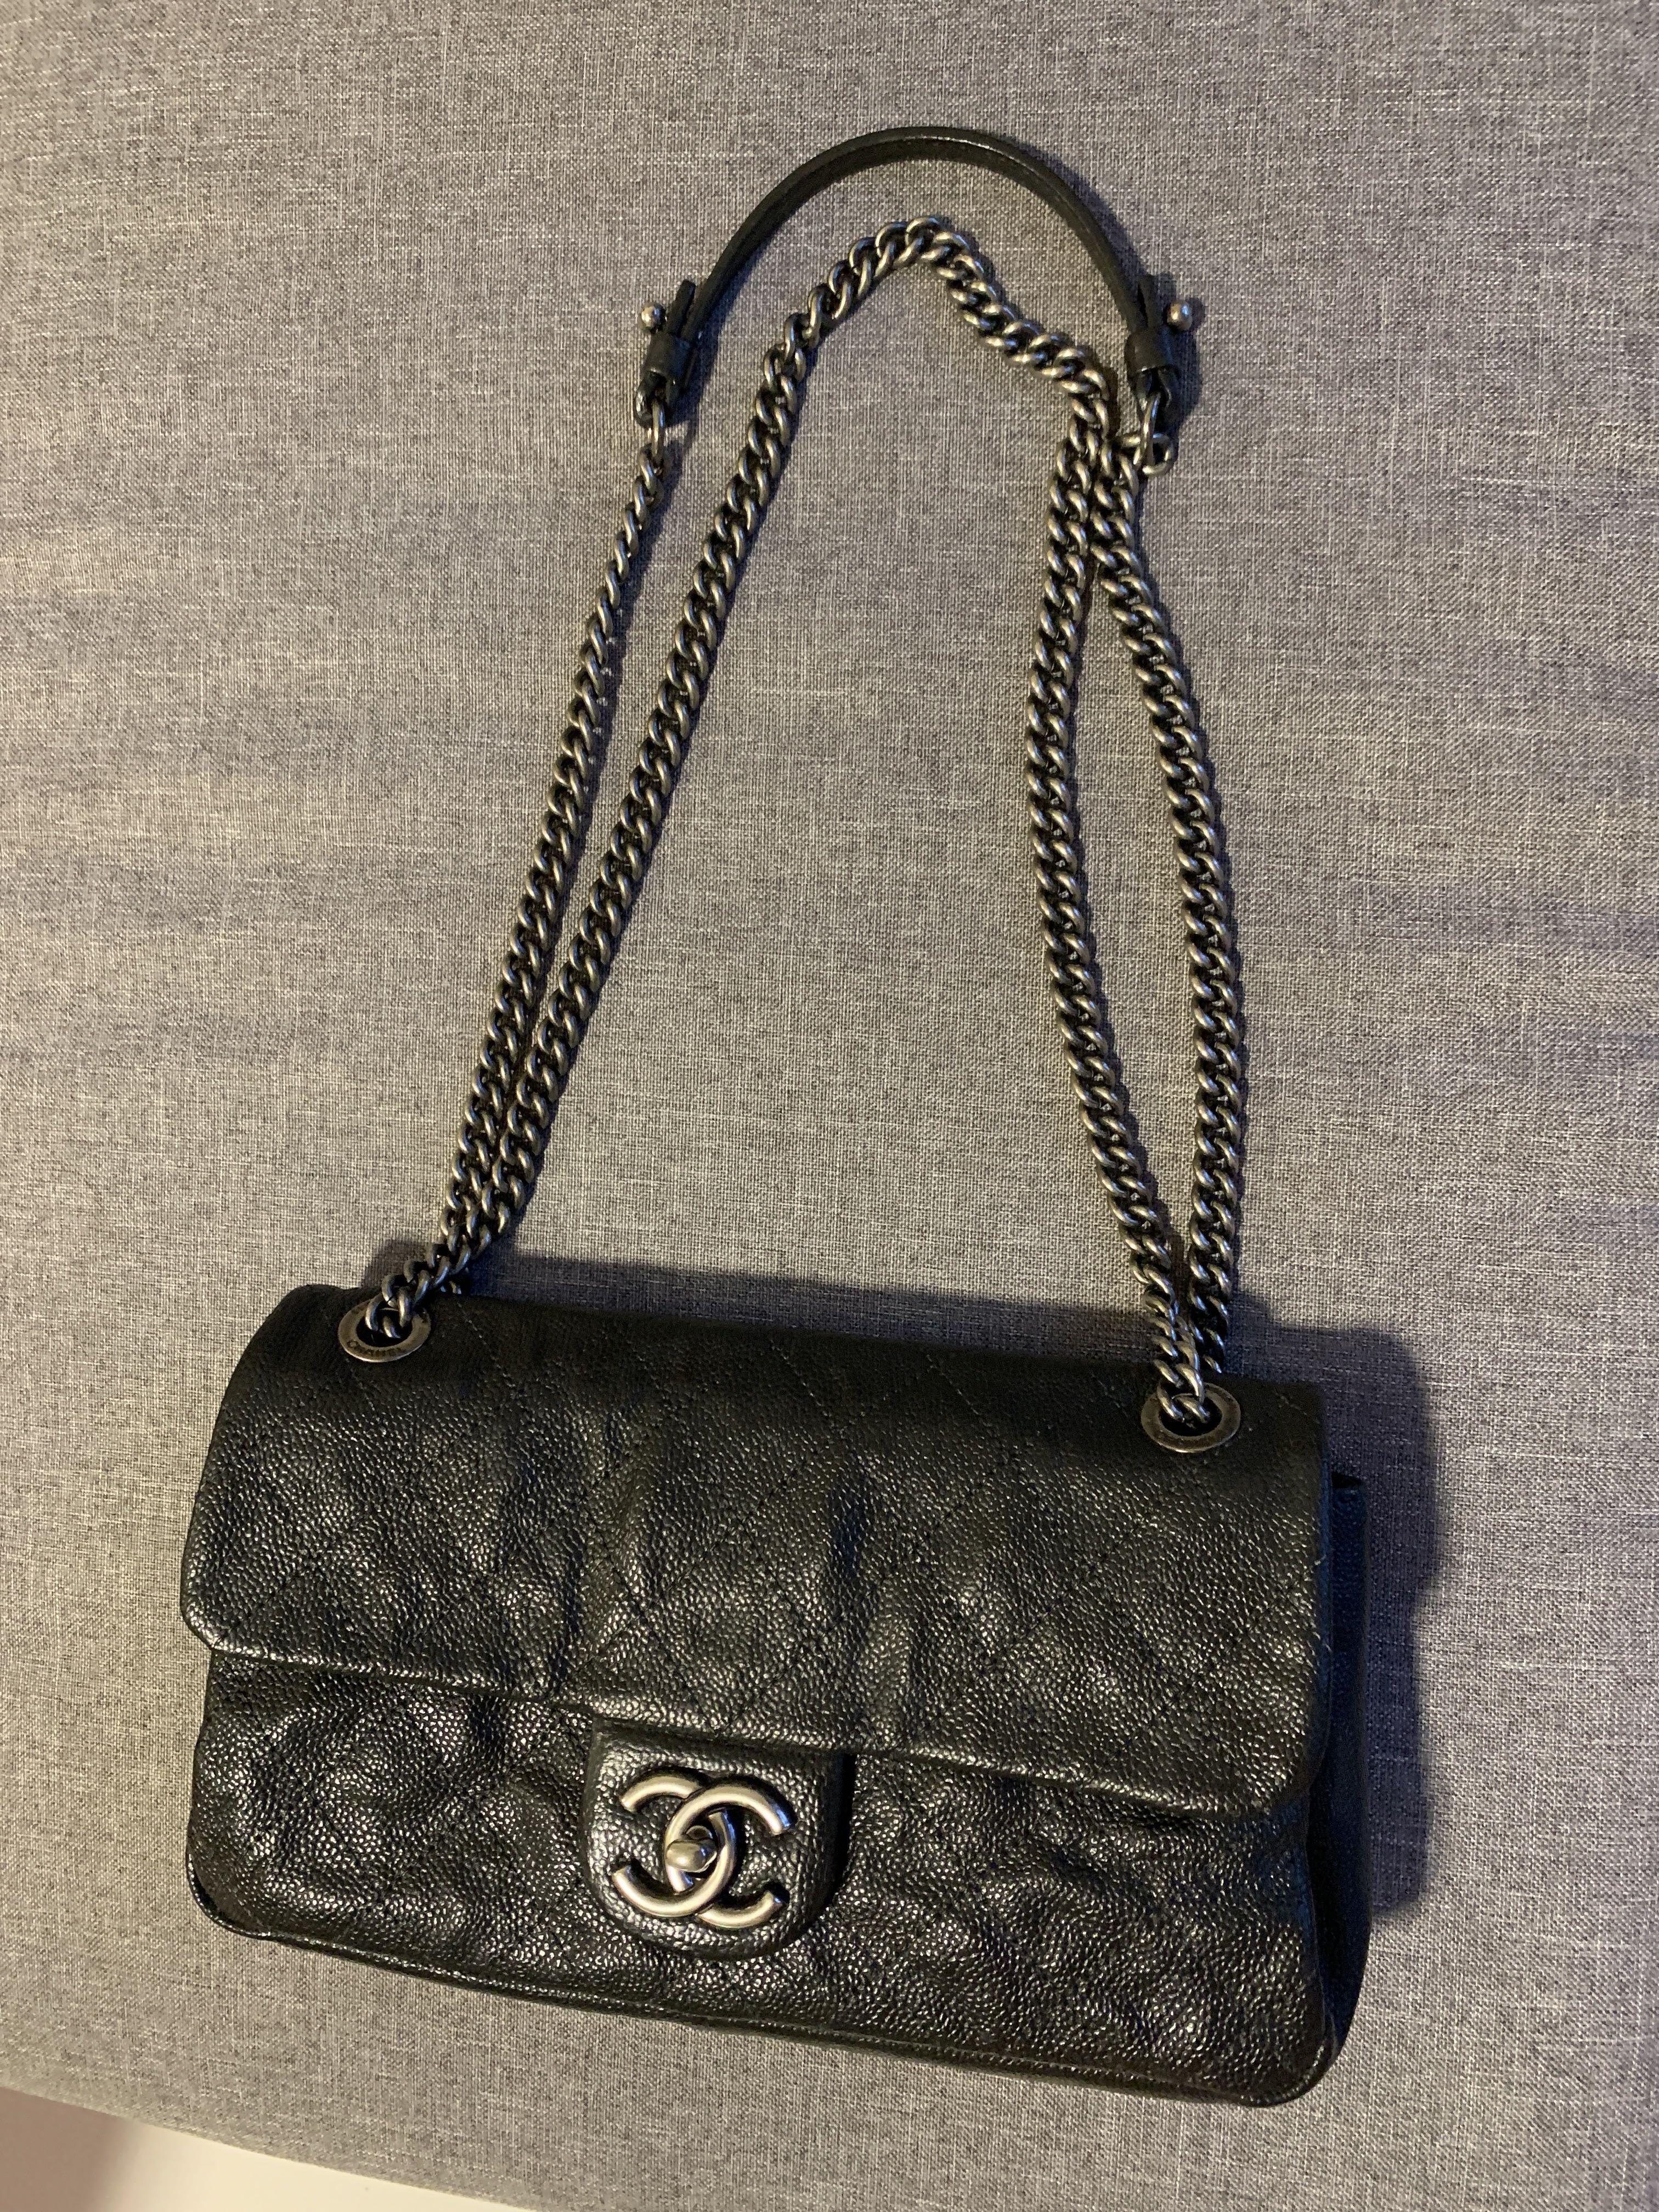 CHANEL Lambskin Quilted Large Trendy CC Dual Handle Flap Bag Black